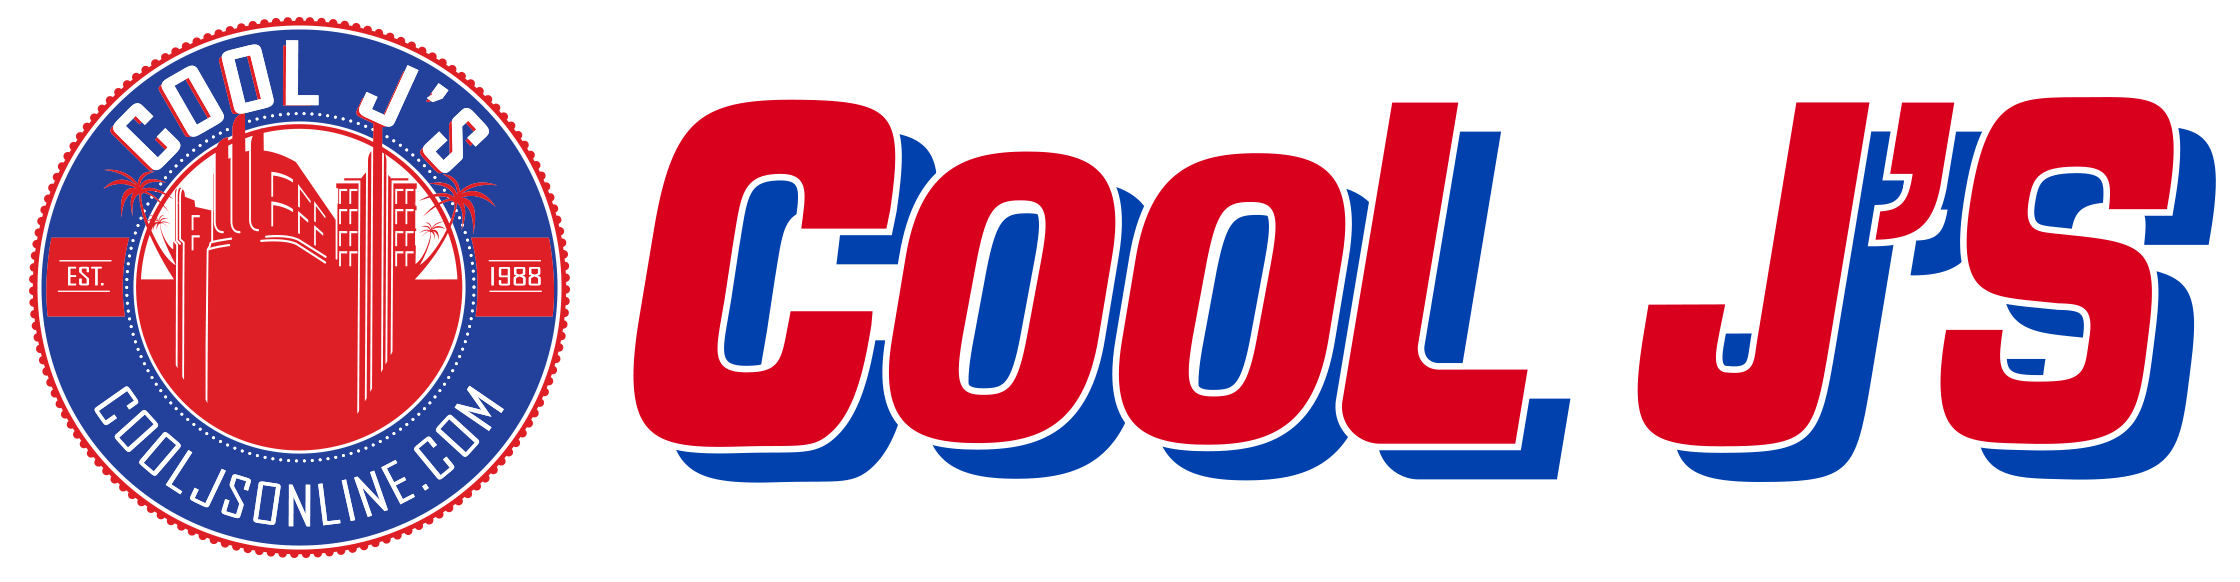 Miami Cool Logo - Home - Cool Js Online